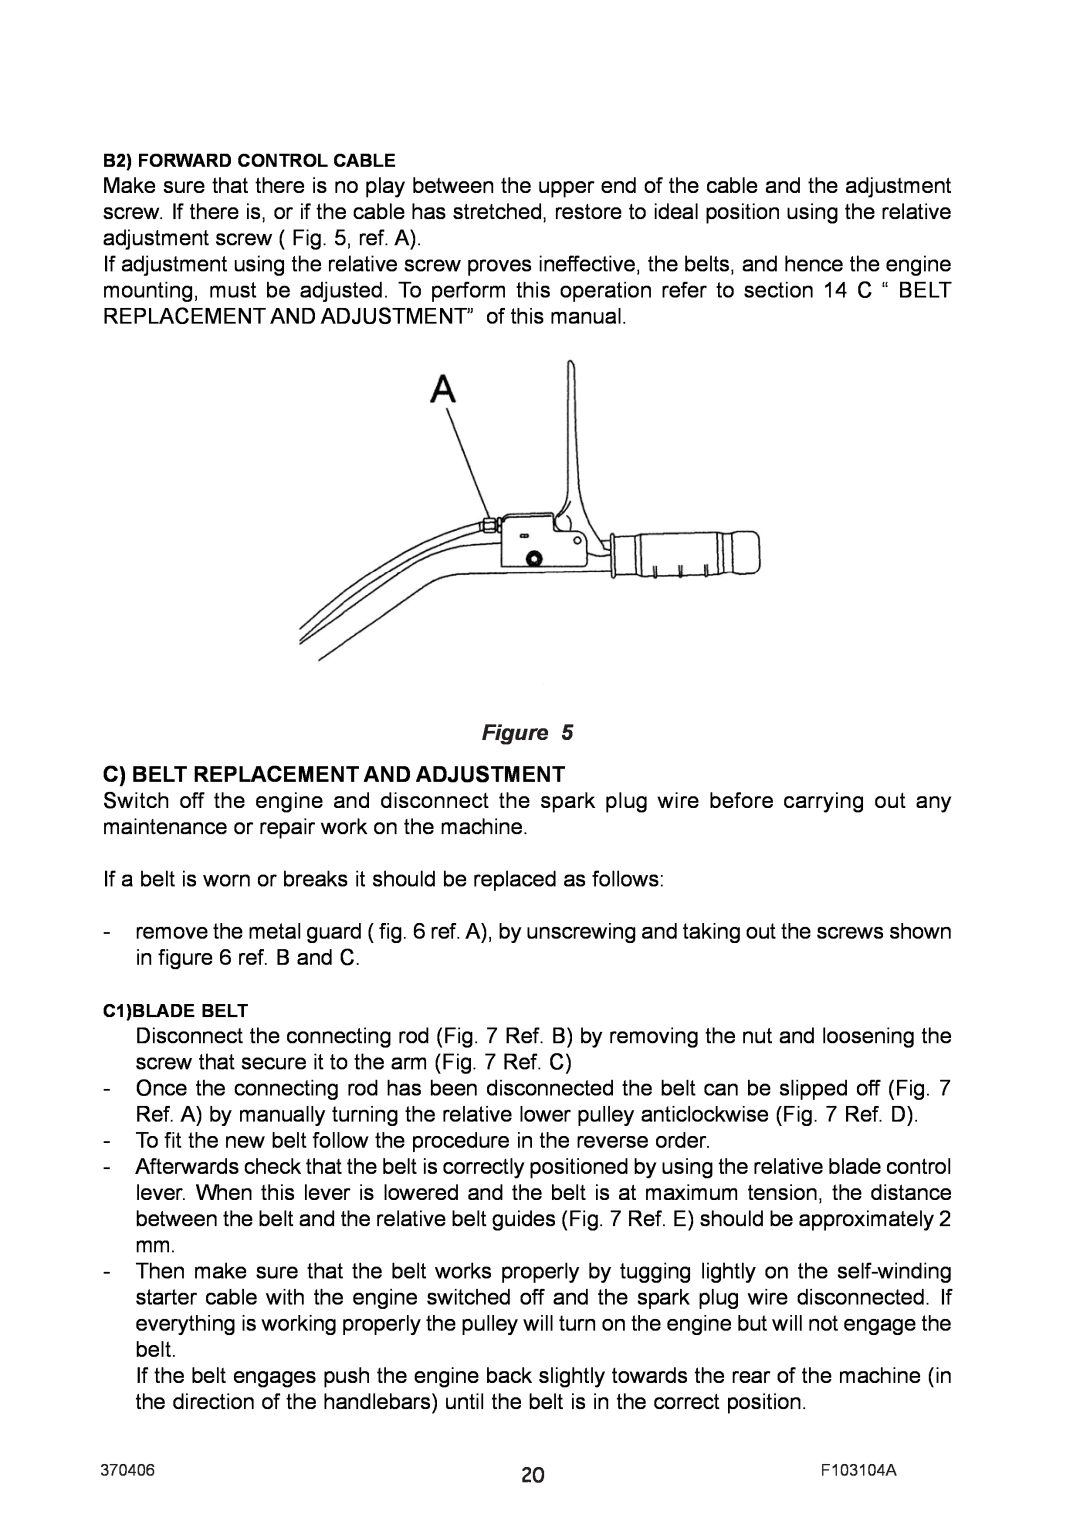 Billy Goat SC121H manual C Belt Replacement And Adjustment, B2 FORWARD CONTROL CABLE, C1BLADE BELT 